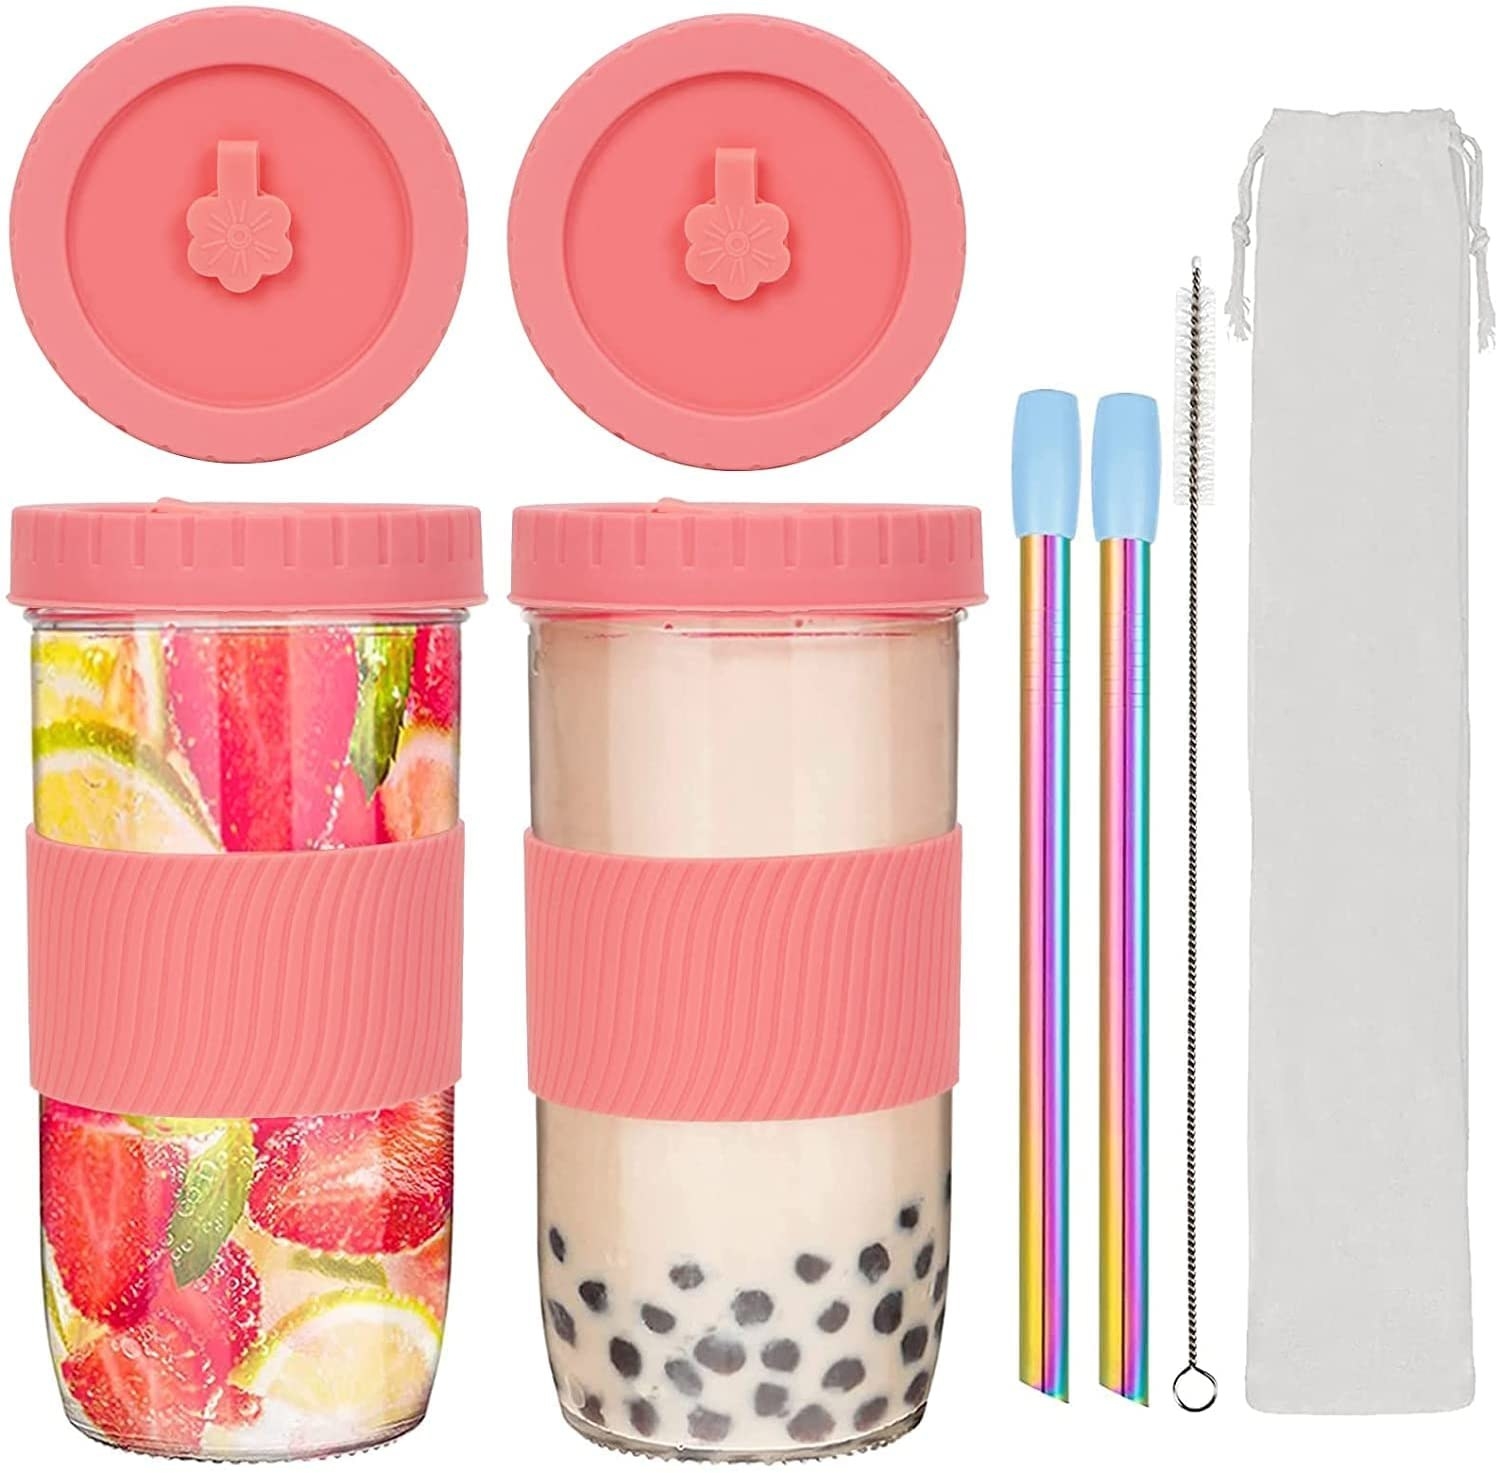 One tumbler filled with bubble tea and one with fruit, surrounded by lids, straws, a straw cleaner, and a straw holder